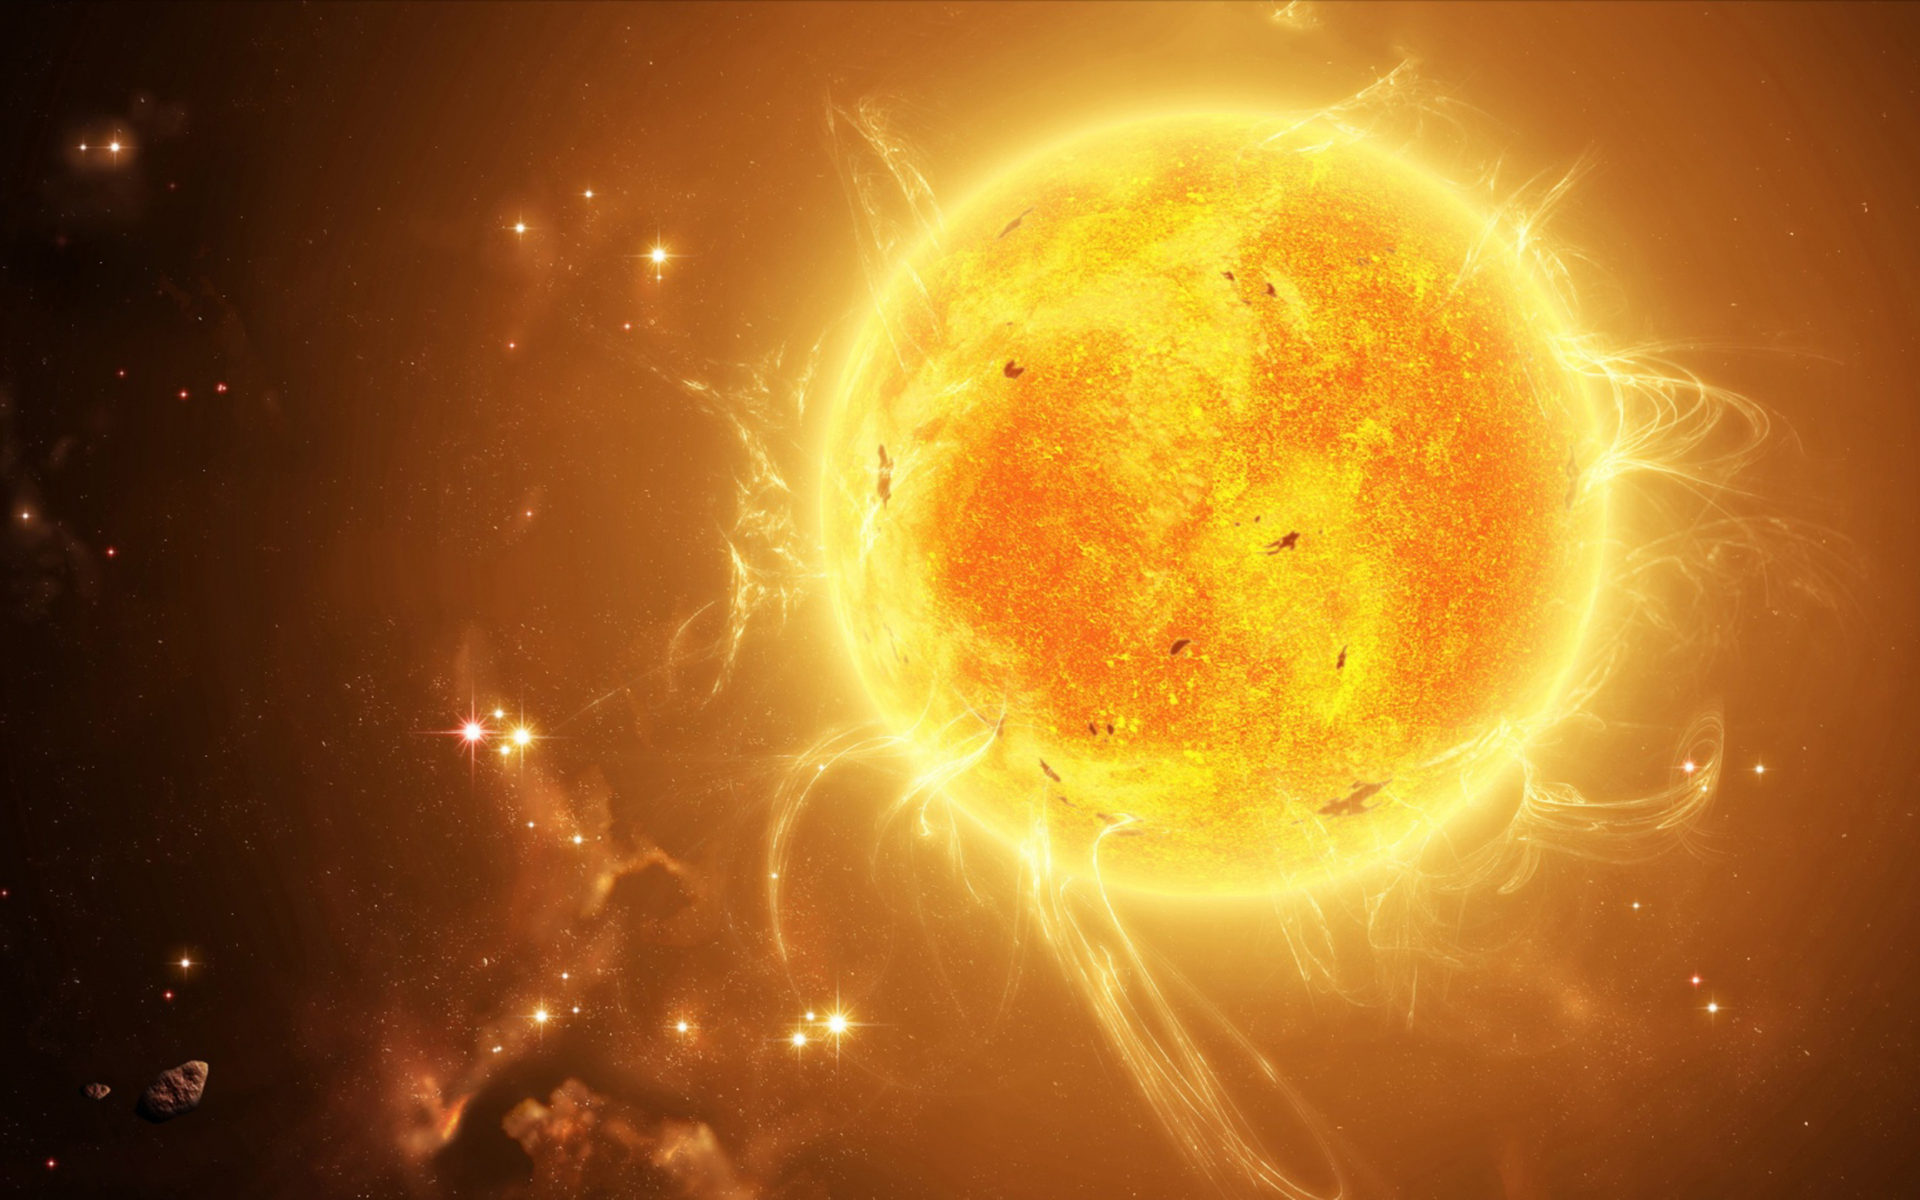 Sun star with a hot plasma in the center solar system surface temperature k download mobile phone wallpaper backgrounds x